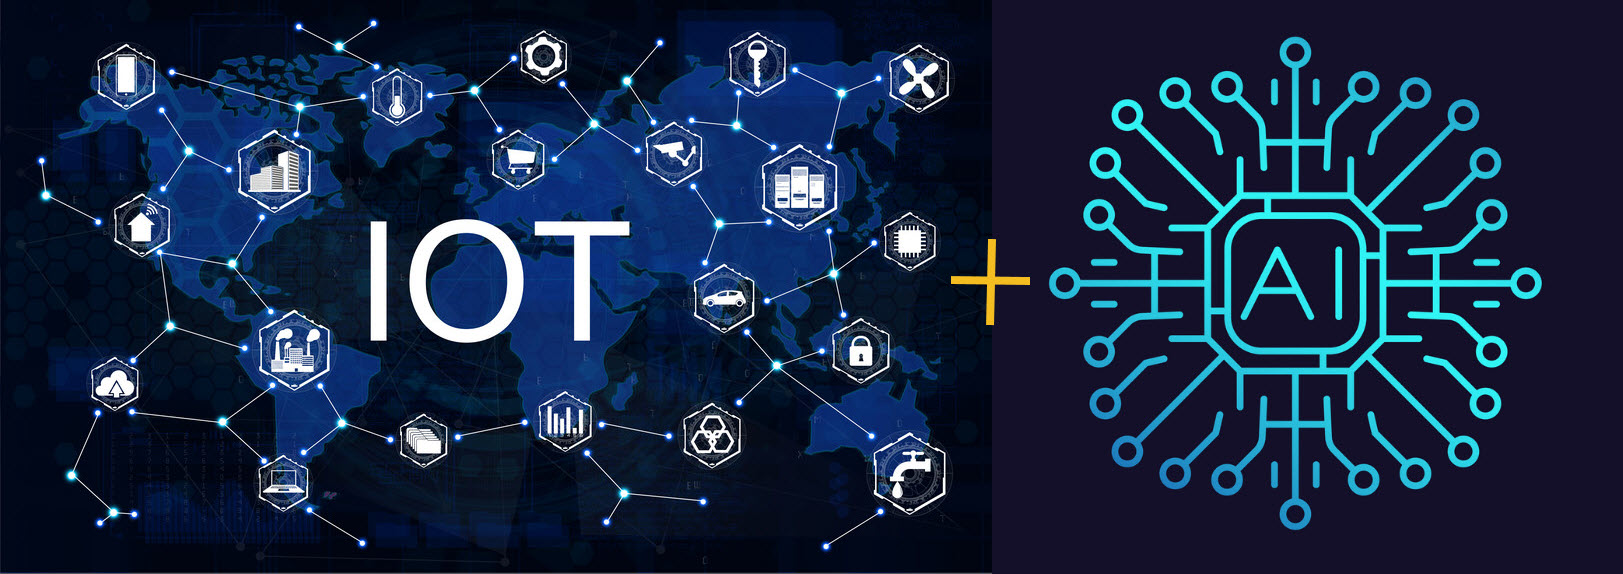 AIoT Understanding the Basic Functionality of Artificial Intelligence & the Internet of Things.